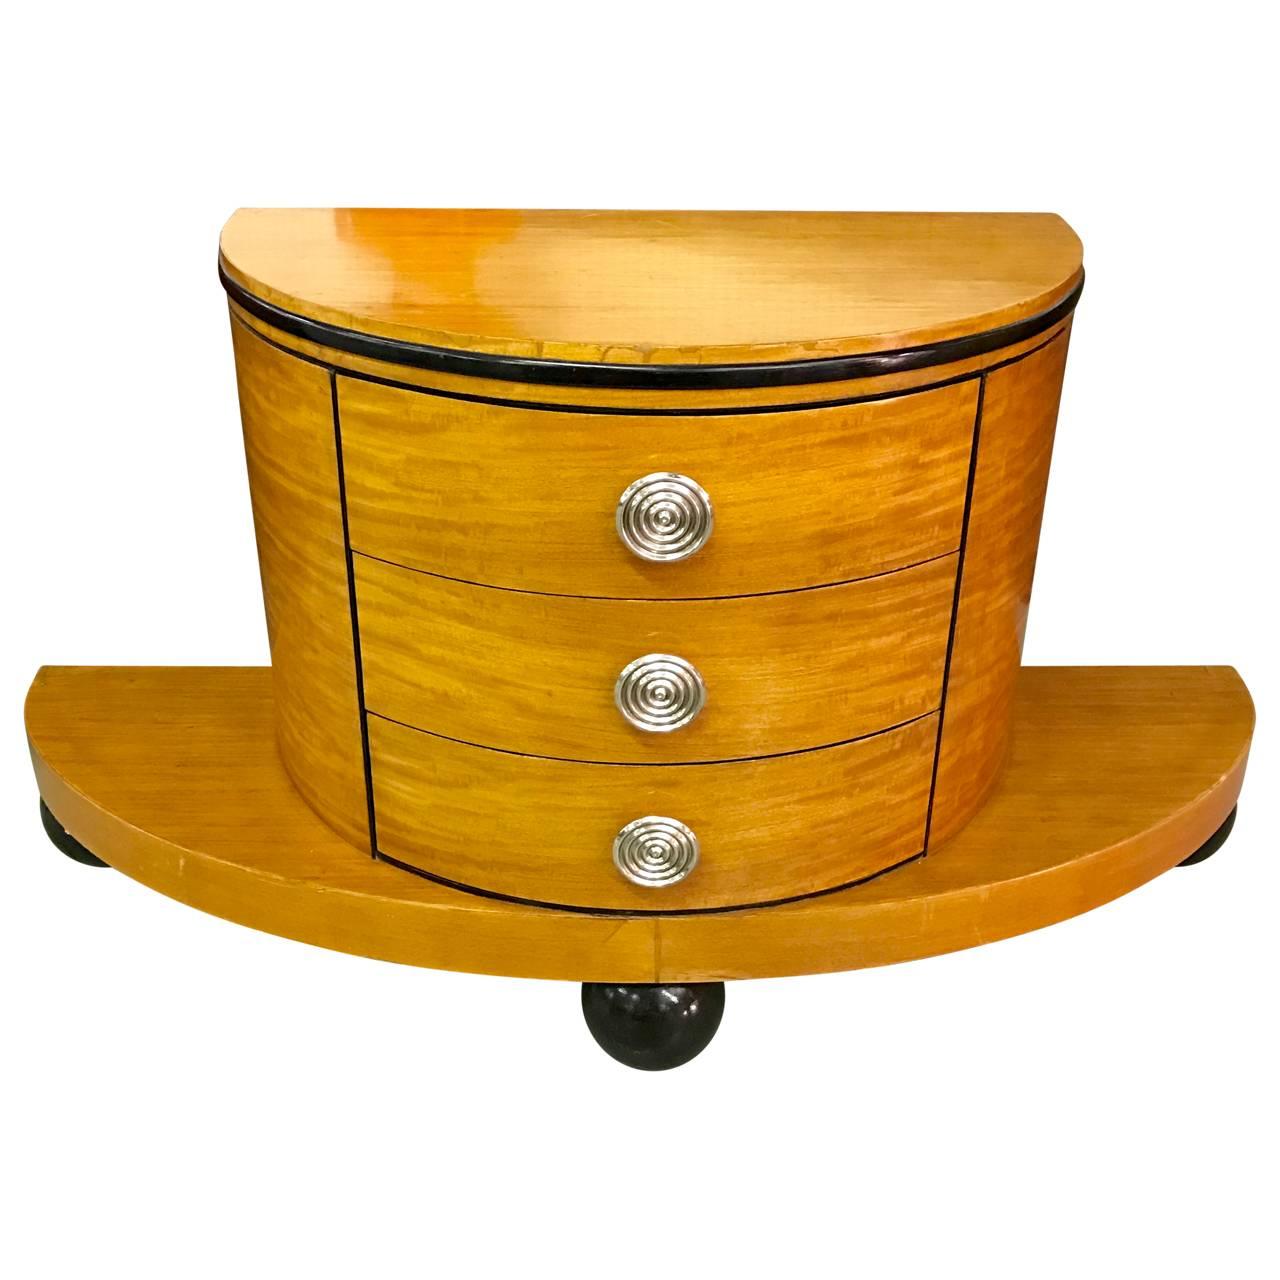 Chrome Italian Art Deco Chest Of Drawers For Sale